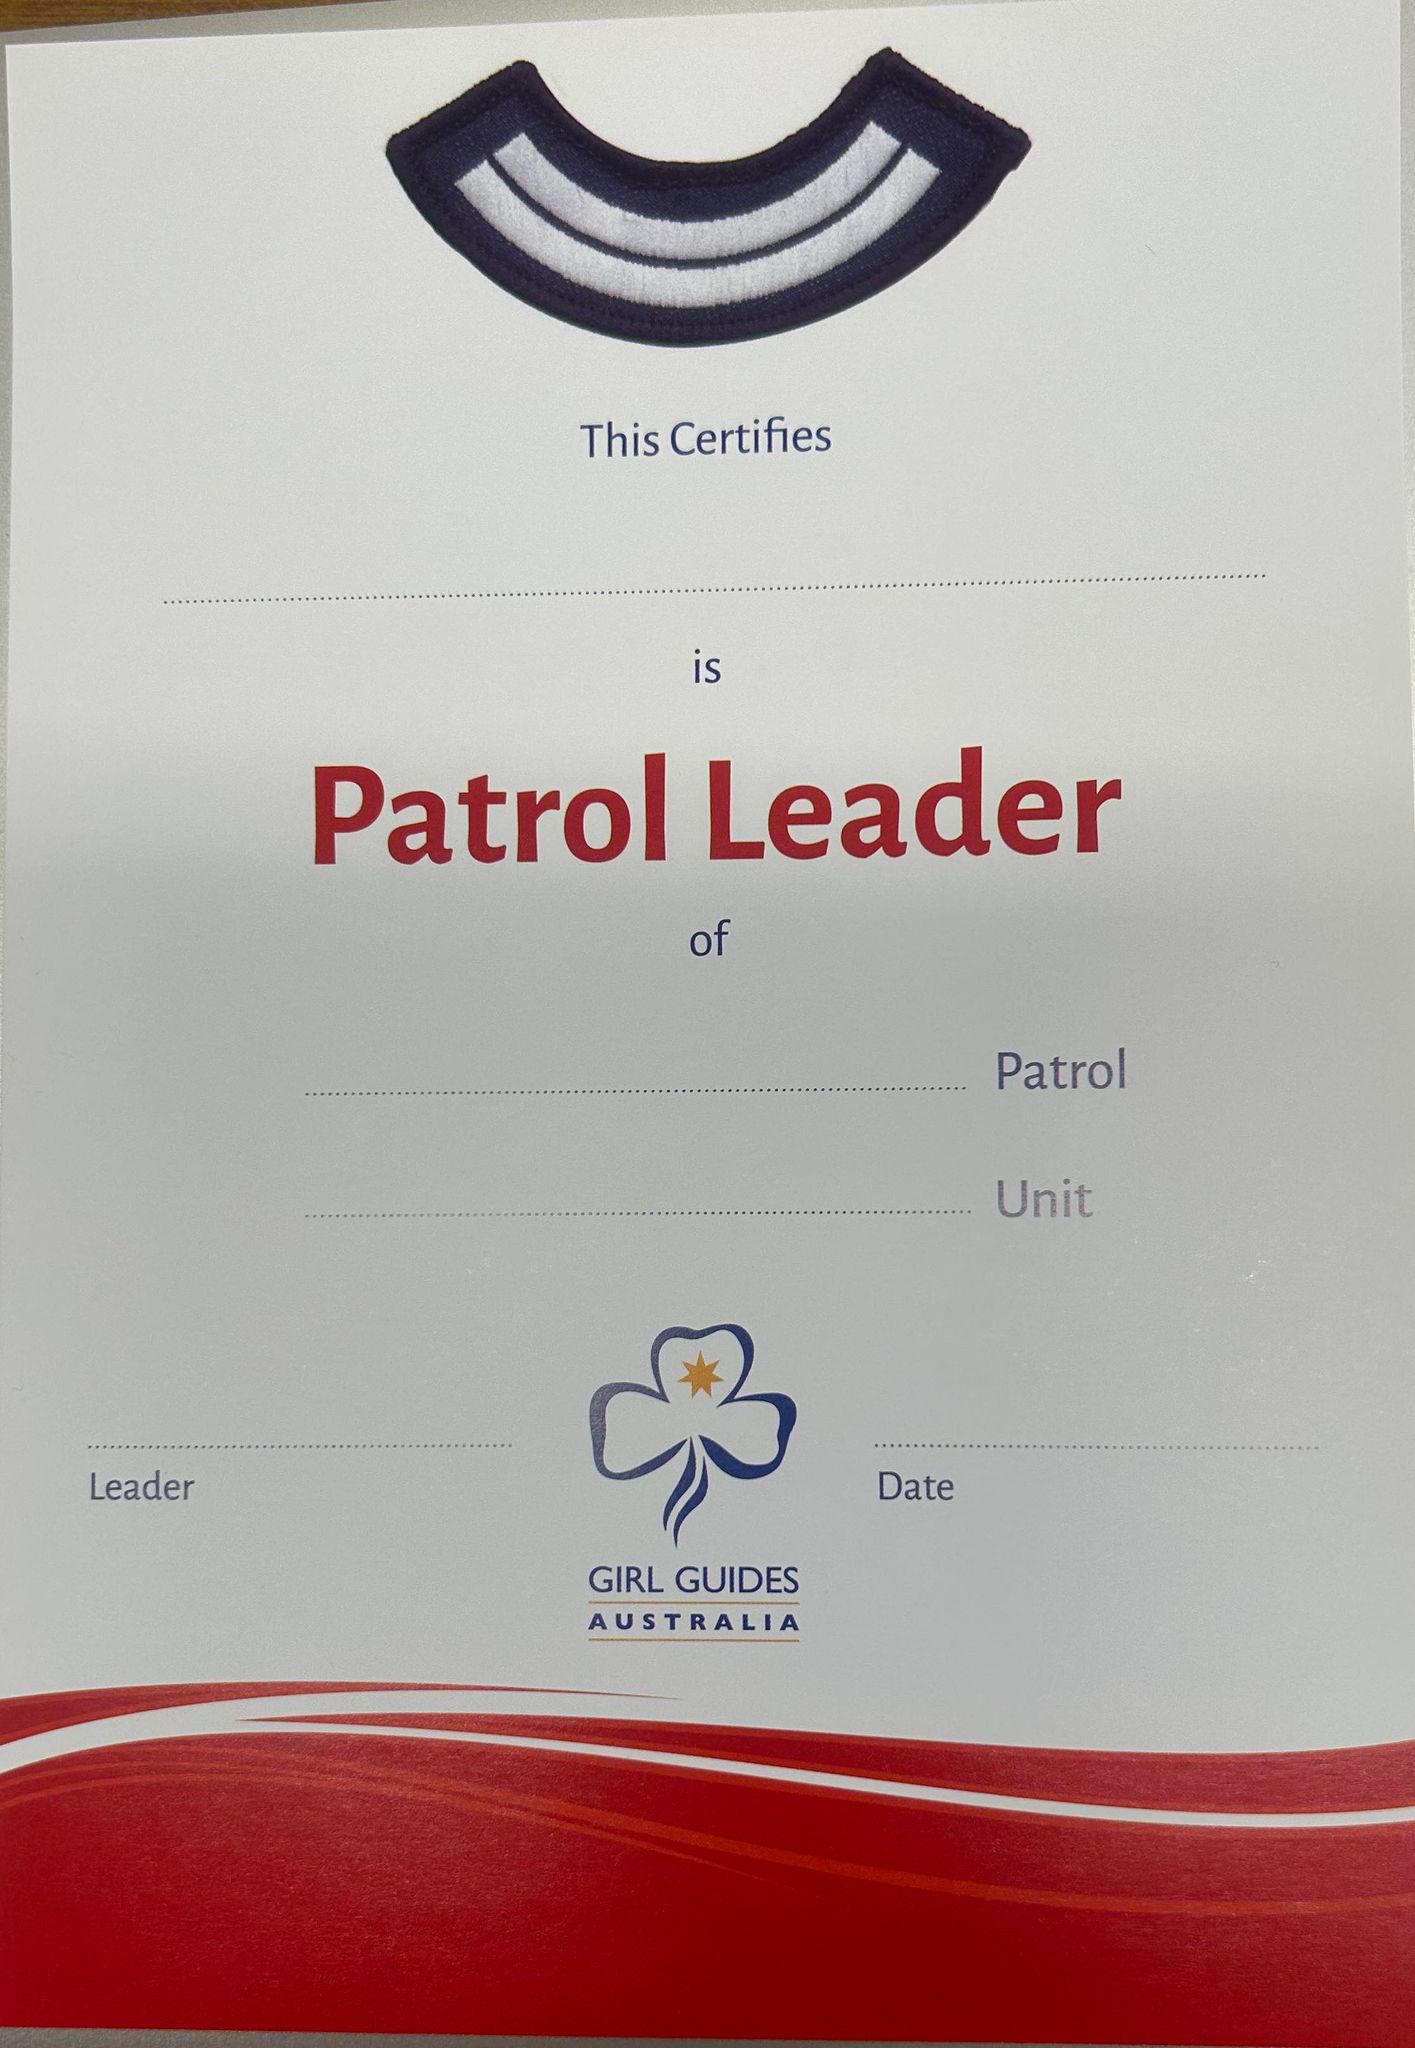 an A5 size certificate with the patrol second stripes and red swirls on it